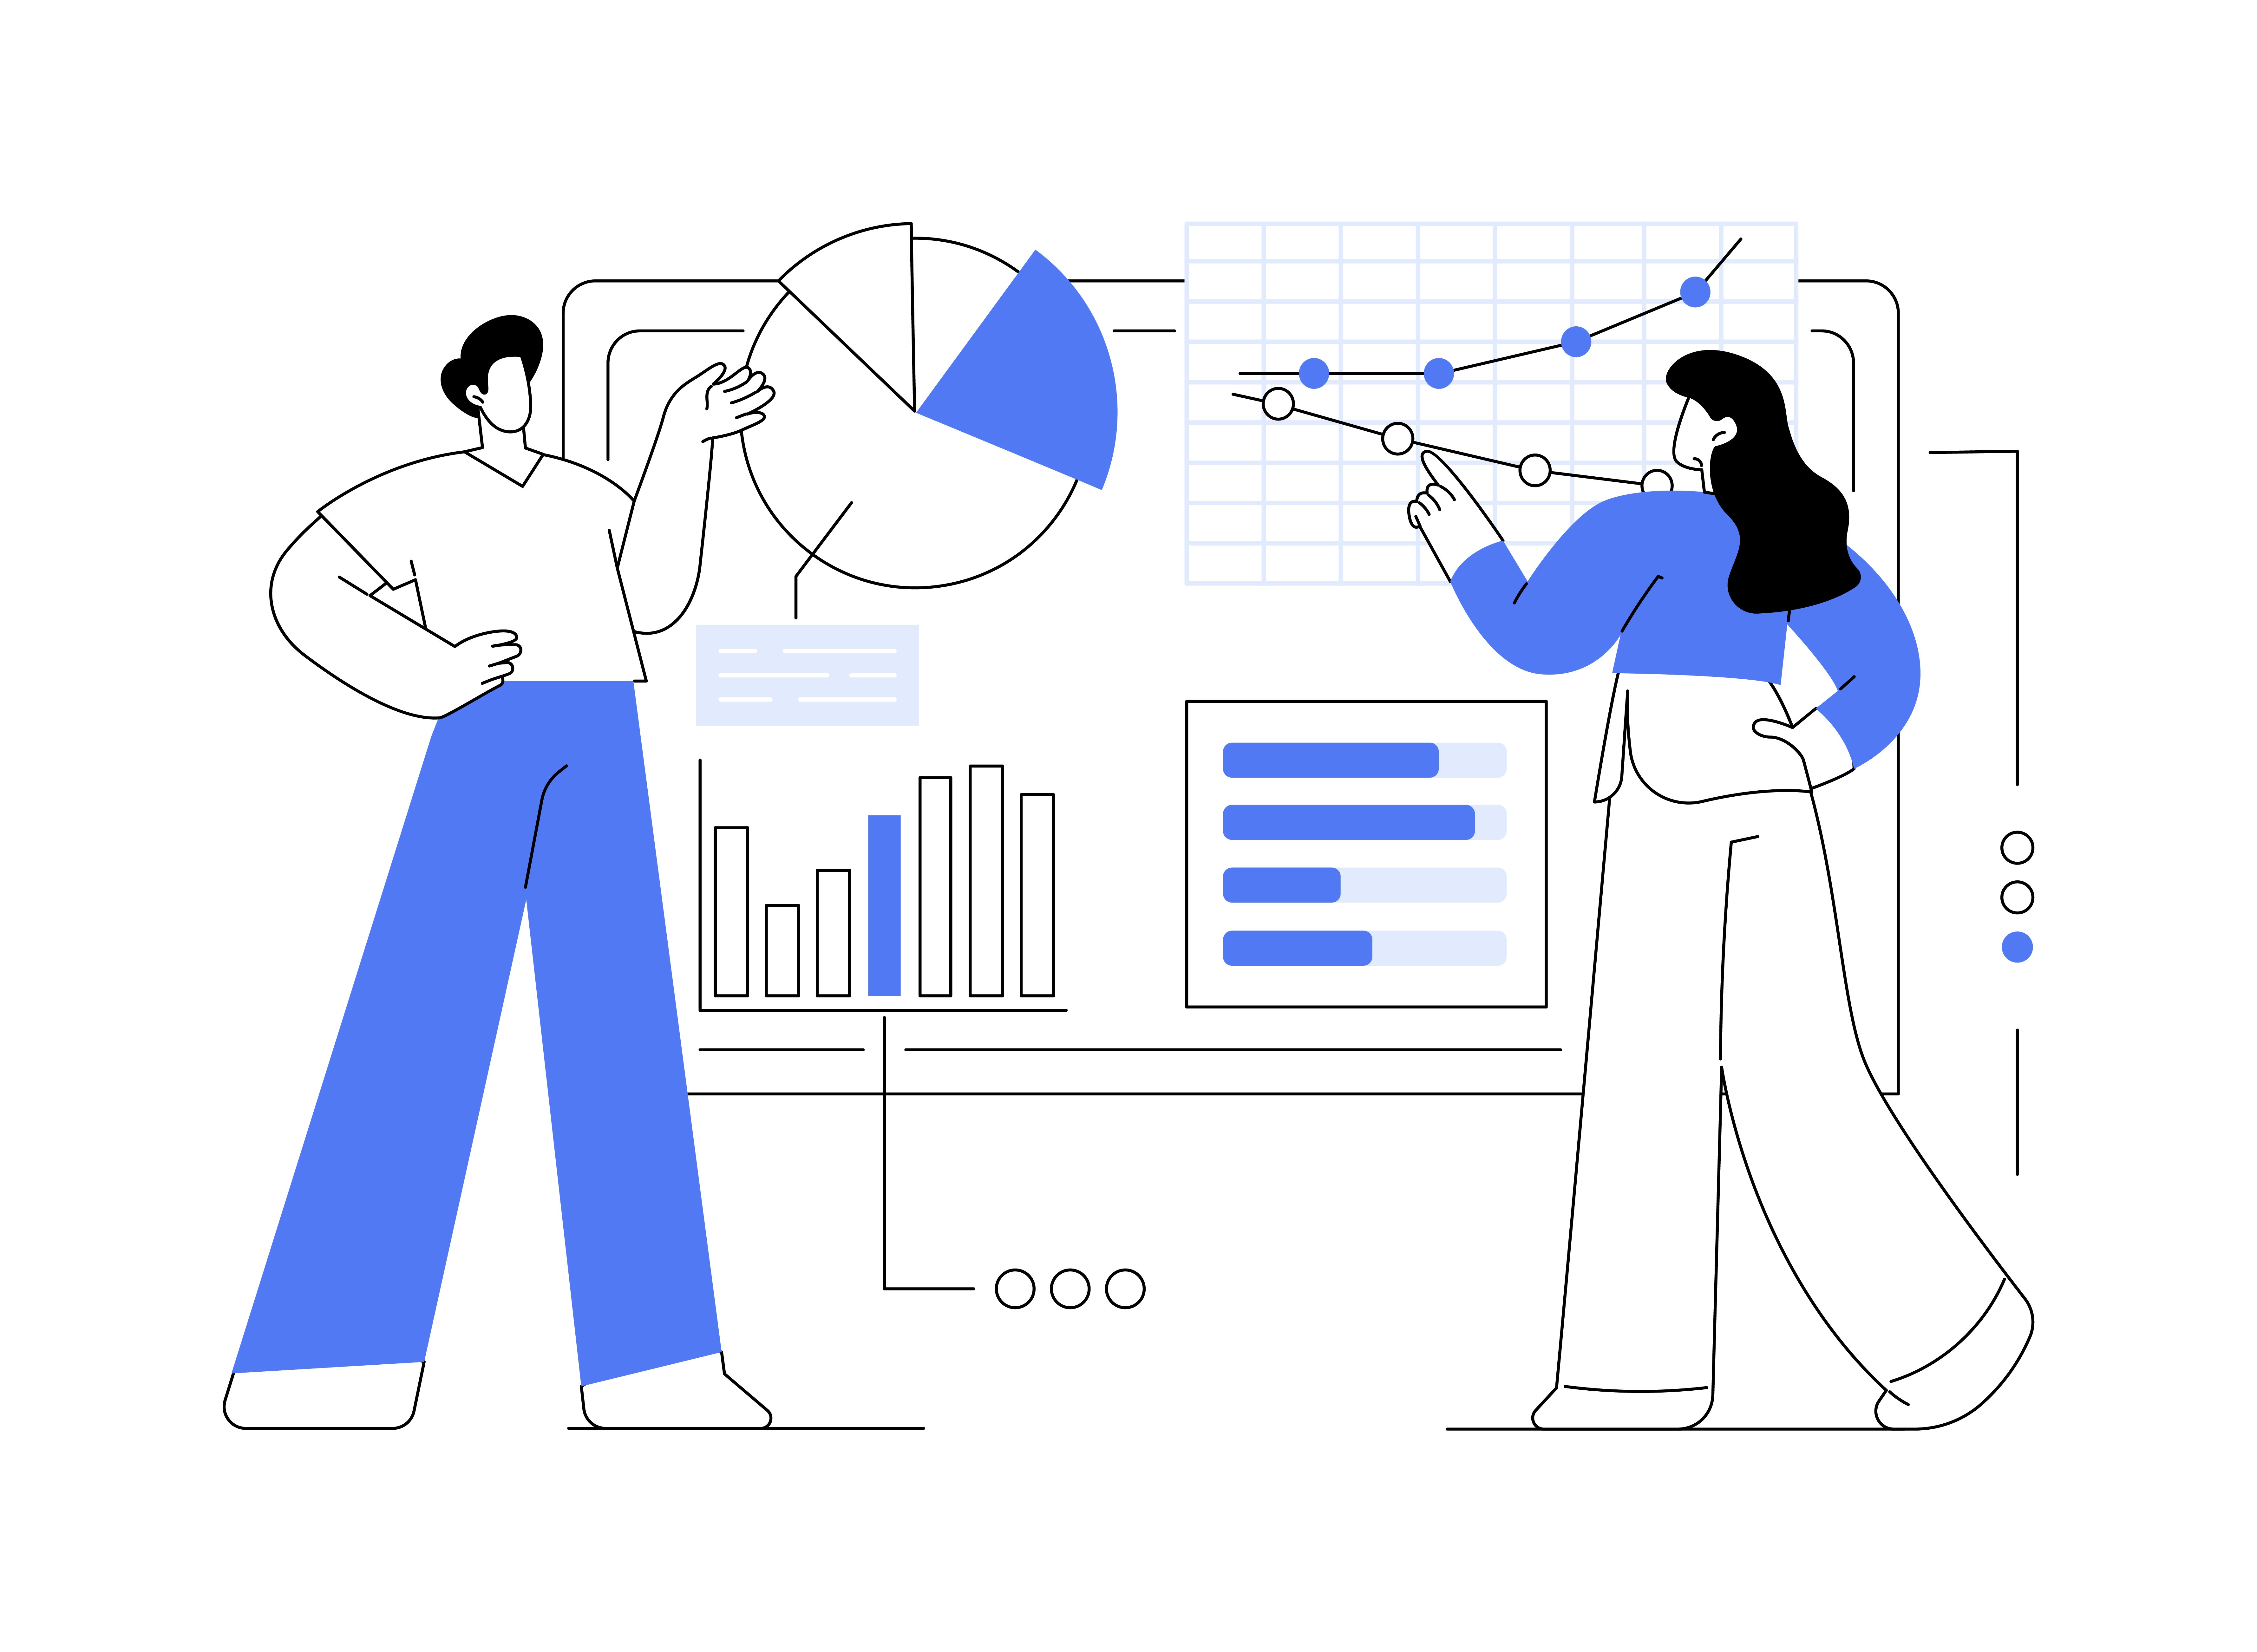 Illustration of two people presenting metric charts